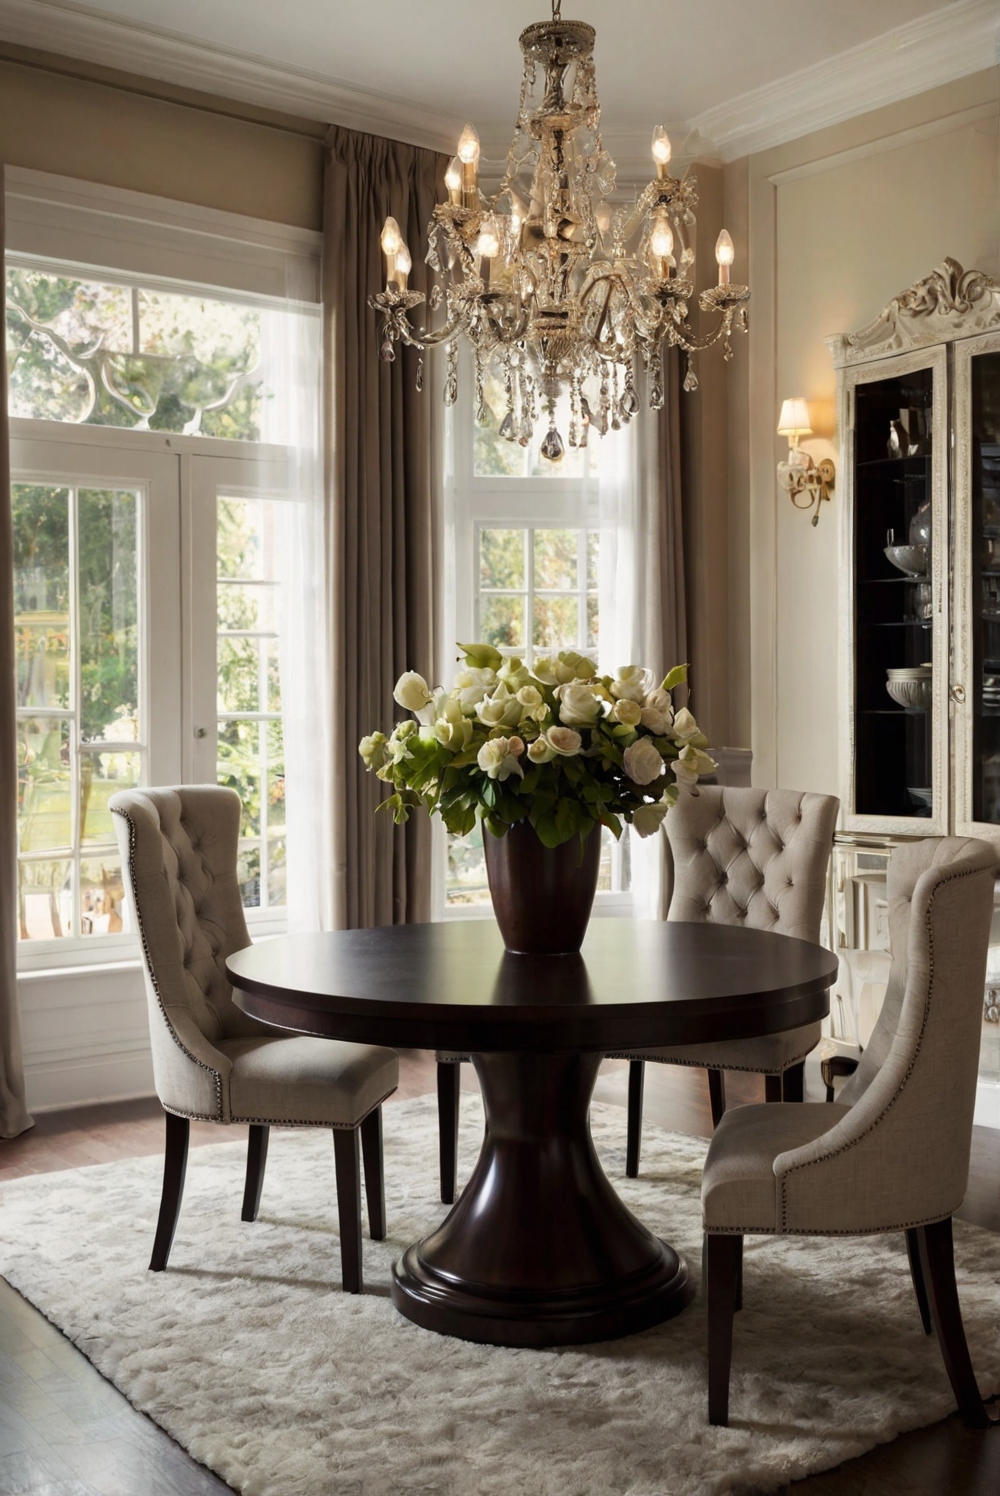 Dining room furniture, Dining room sets, Formal dining room chairs, Elegant dining chairs, Dining table sets, Luxury dining tables, Fine dining chairs Home decorating, Home interior design, Interior bedroom design, Kitchen designs, Living room interior, Designer wall paint, Paint color match